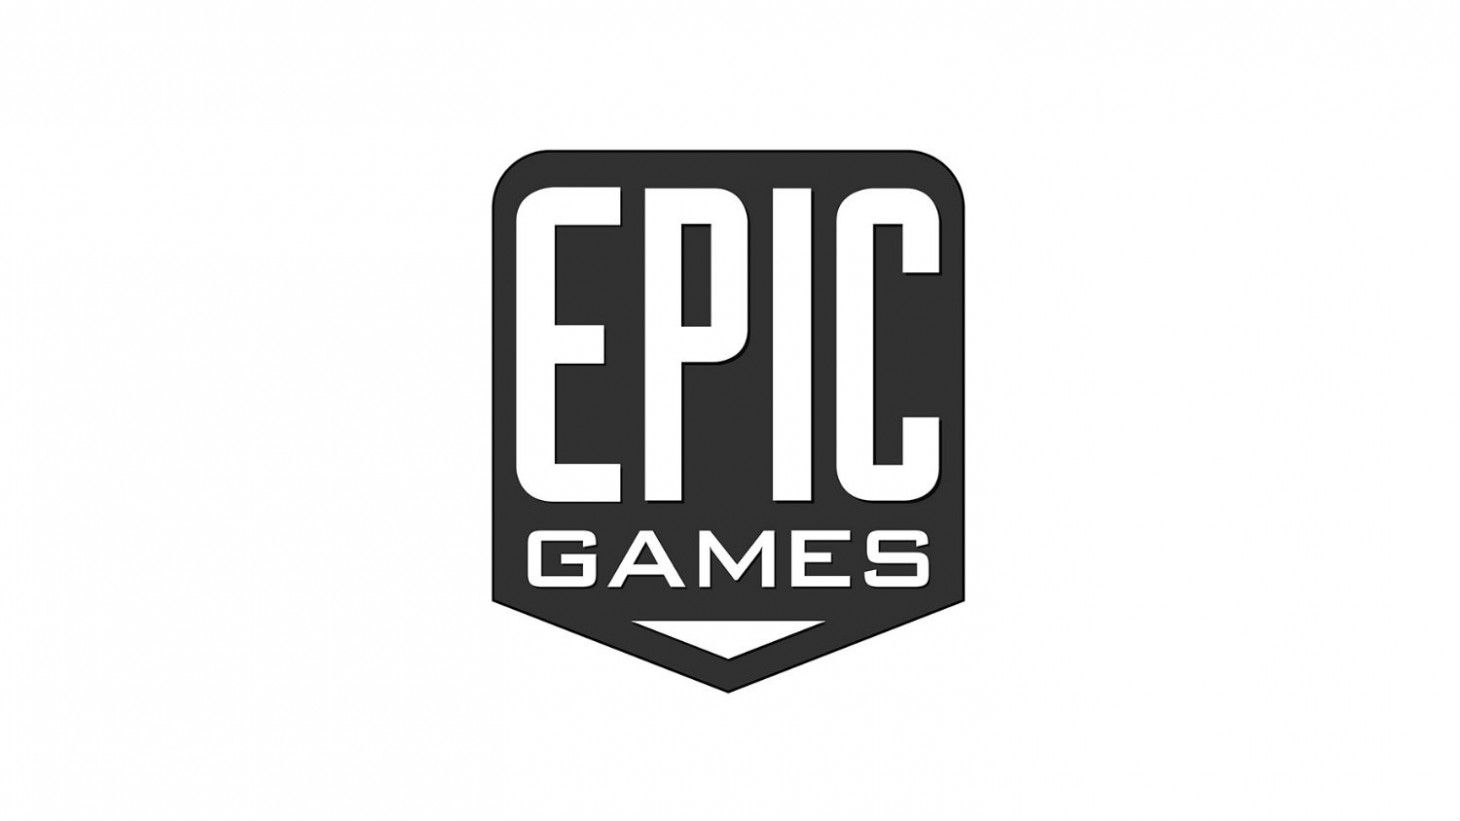 Two free games on Epic Store next week